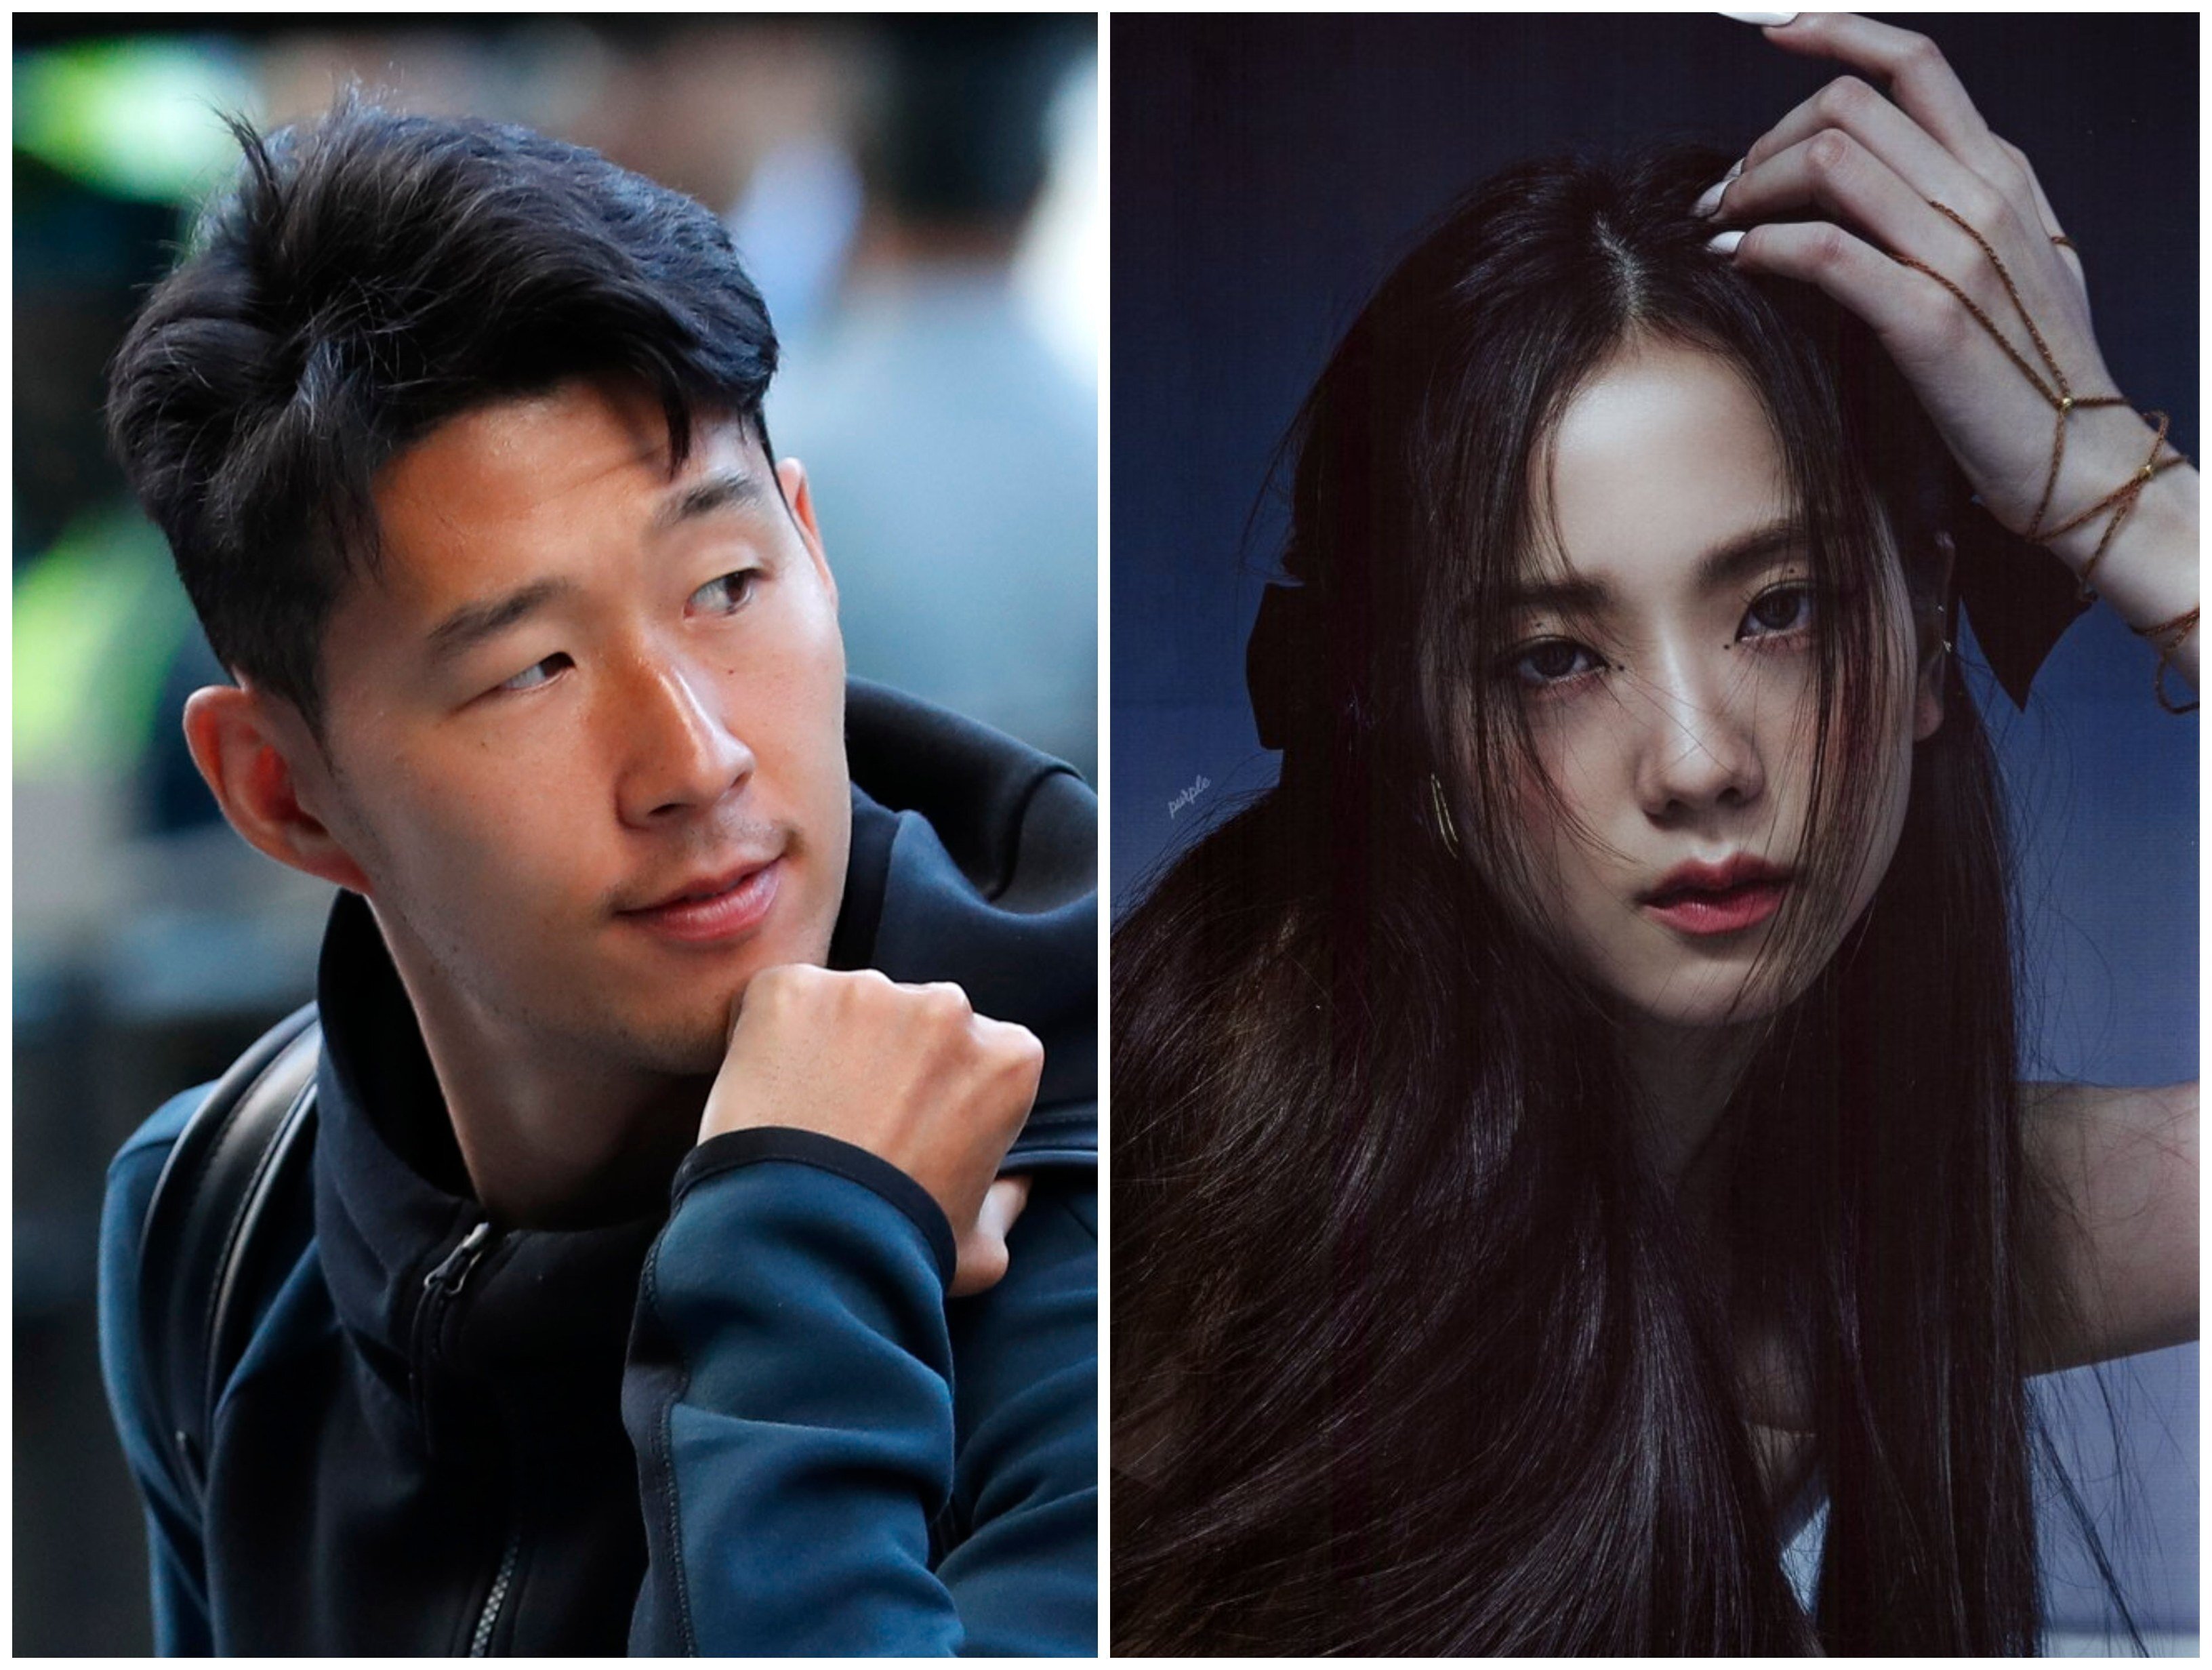 Are two of South Korea’s biggest and most internationally recognisable stars dating? English Premier League footballer Son Heung-min and Jisoo of K-pop band Blackpink. Photos: AP, YG Entertainment